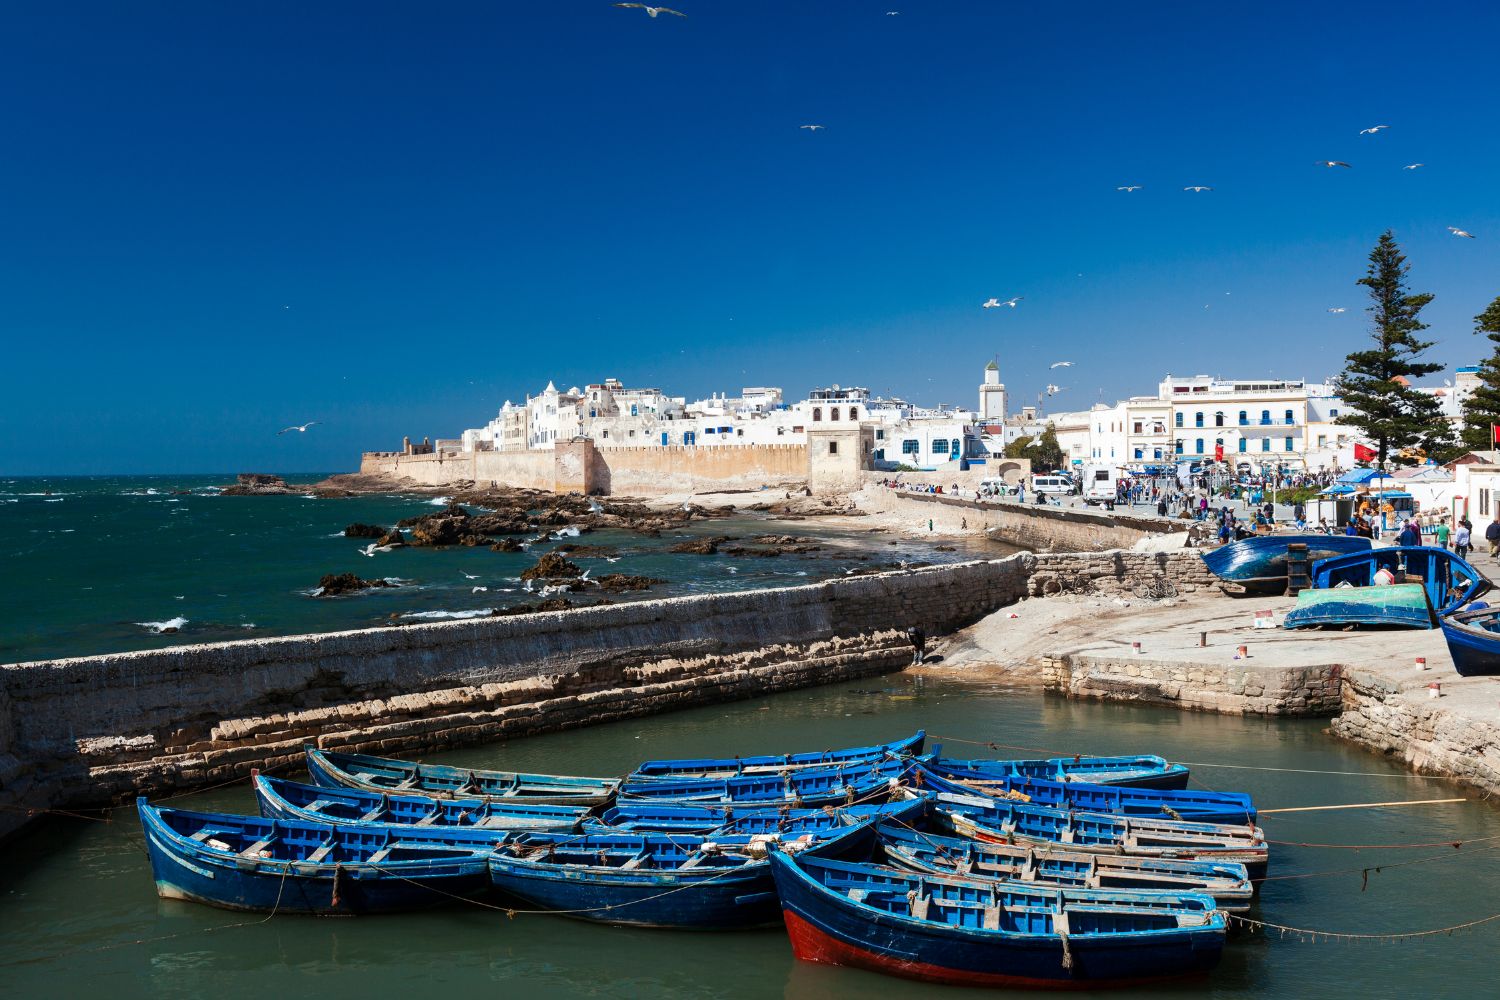 What to Visit in Essaouira